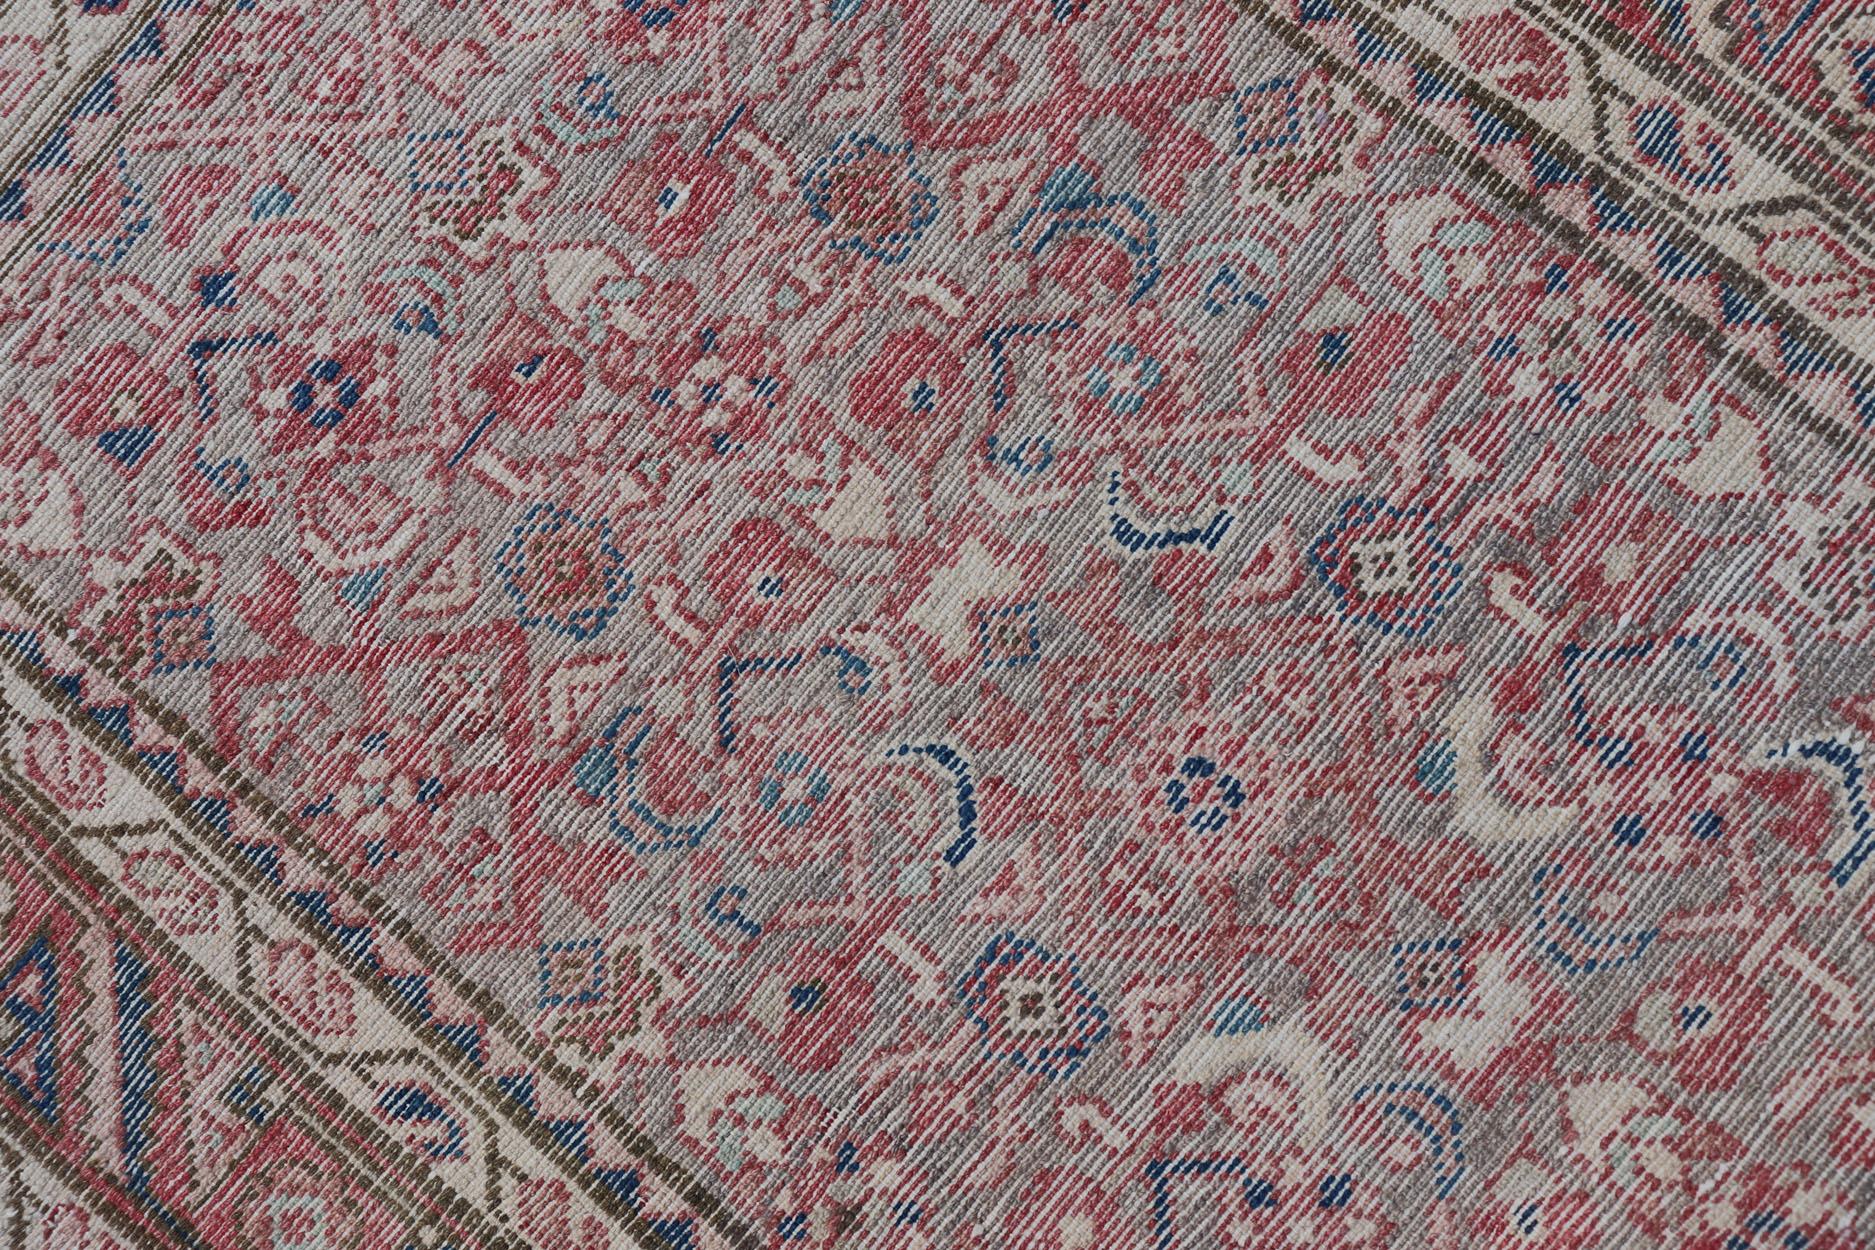 Antique Persian Malayer Runner in Tones of Blue, Salmon, Cream, and Tans For Sale 6